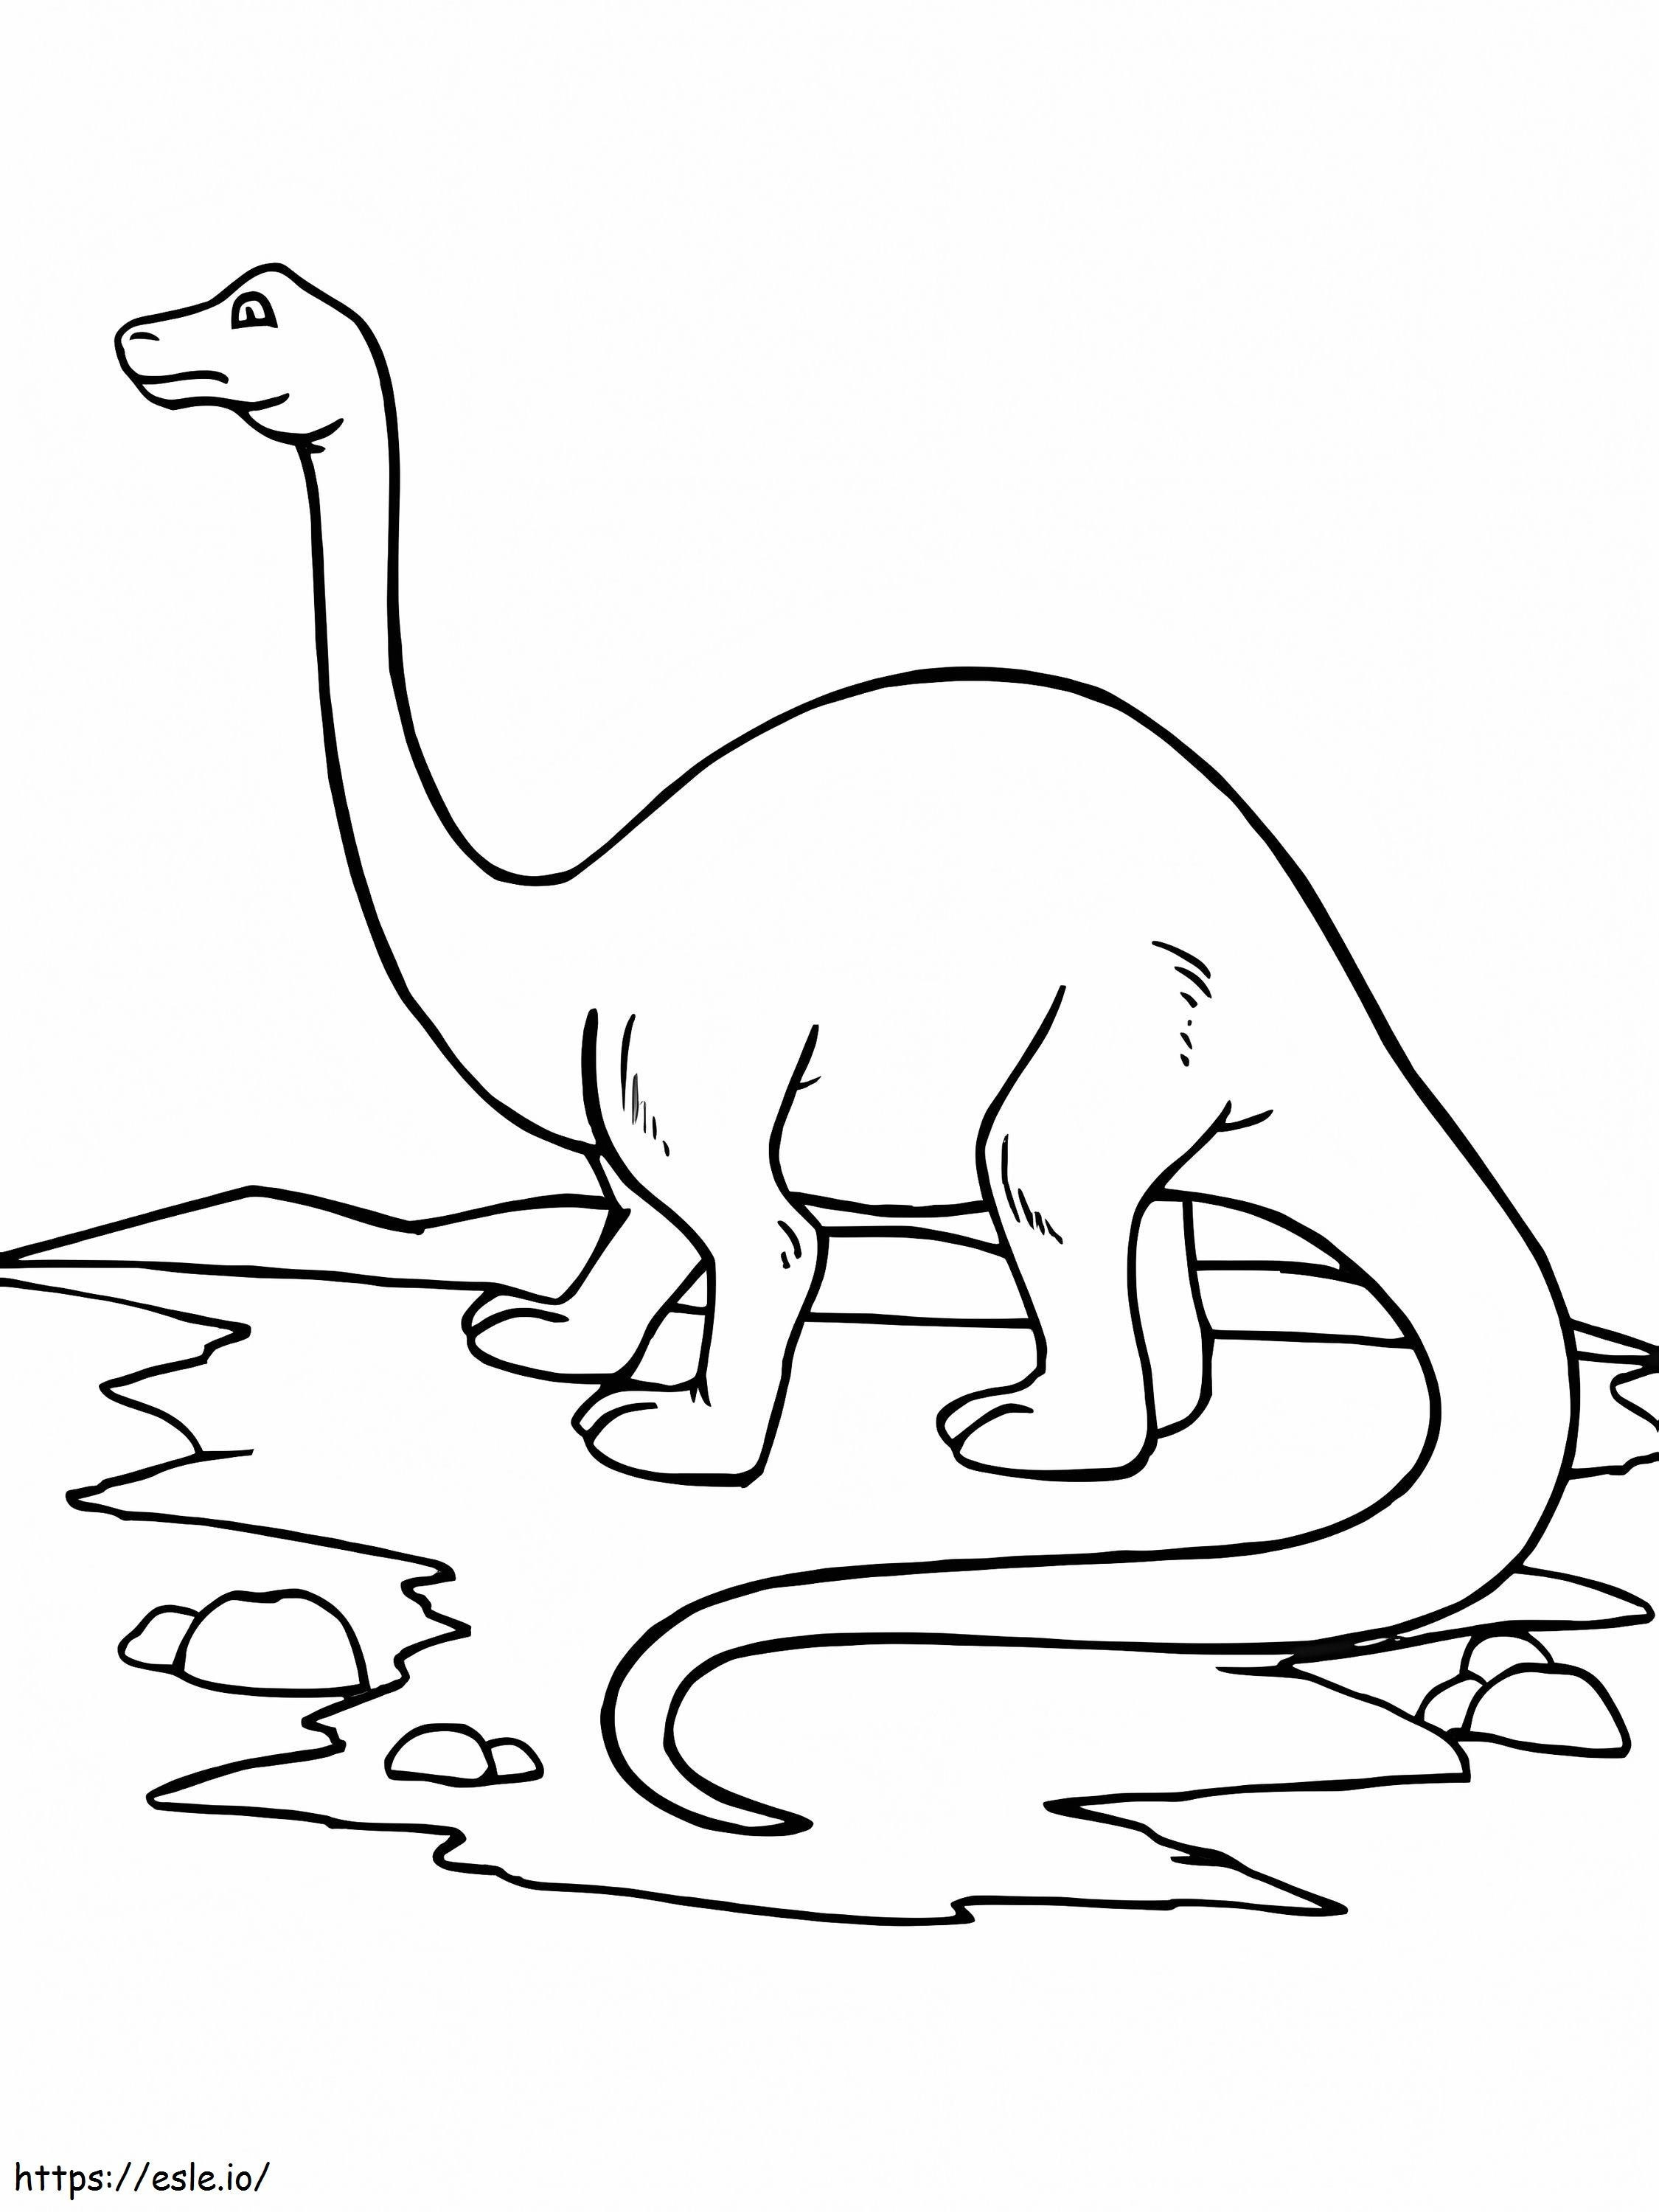 Brontosaurus In The Water coloring page